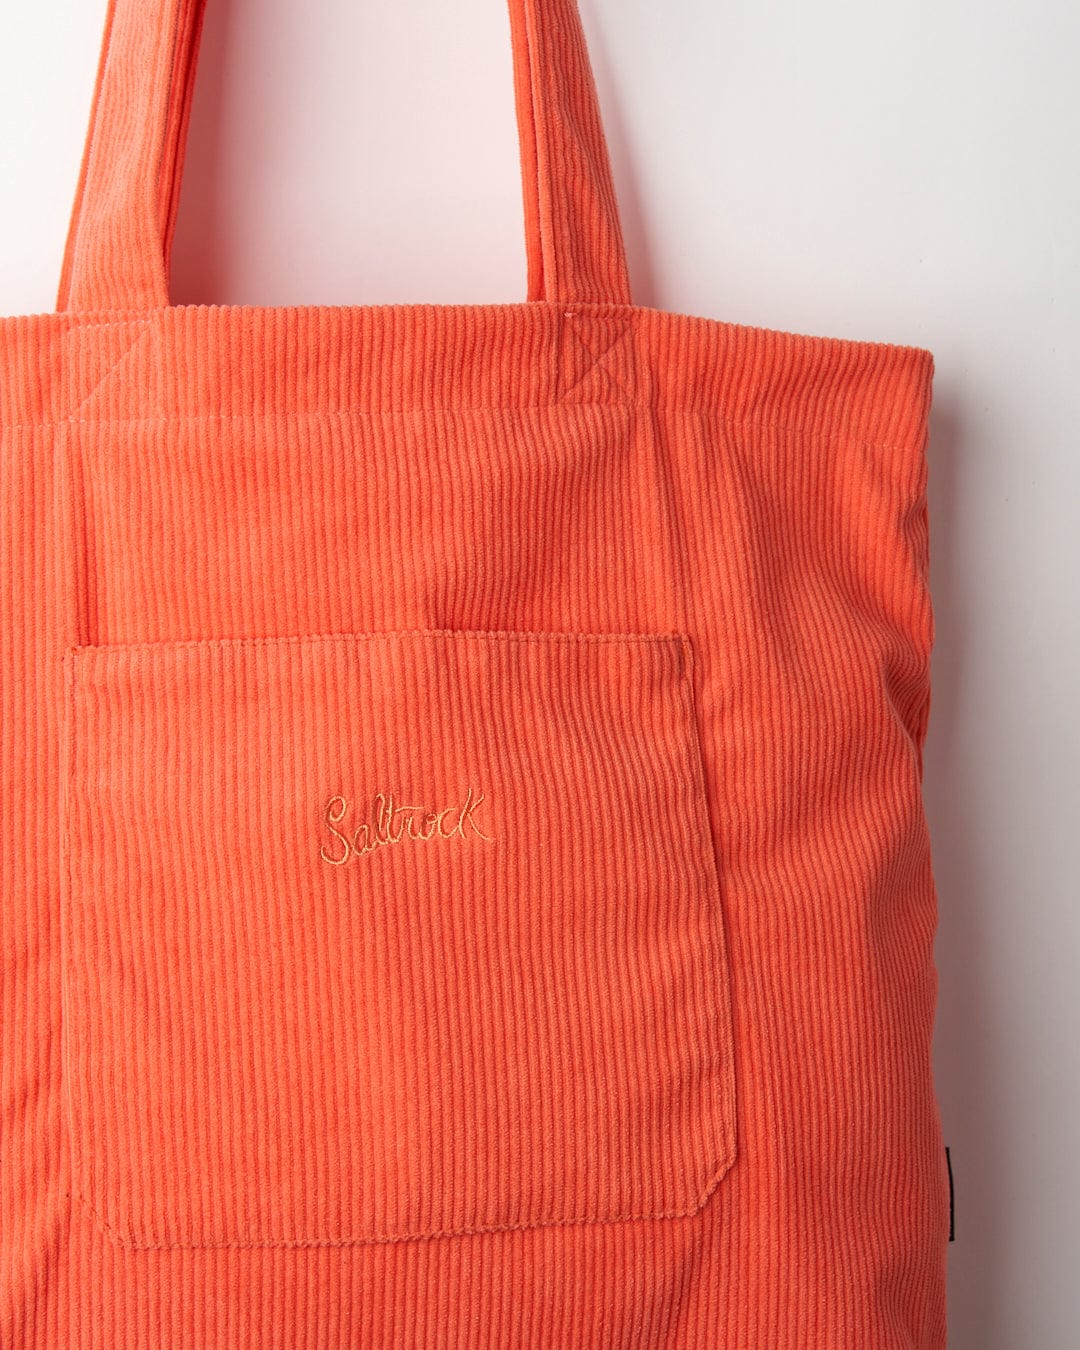 Close-up of a Laguna Cord Shopper Bag - Coral with shoulder straps and a stitched Saltrock branding label.